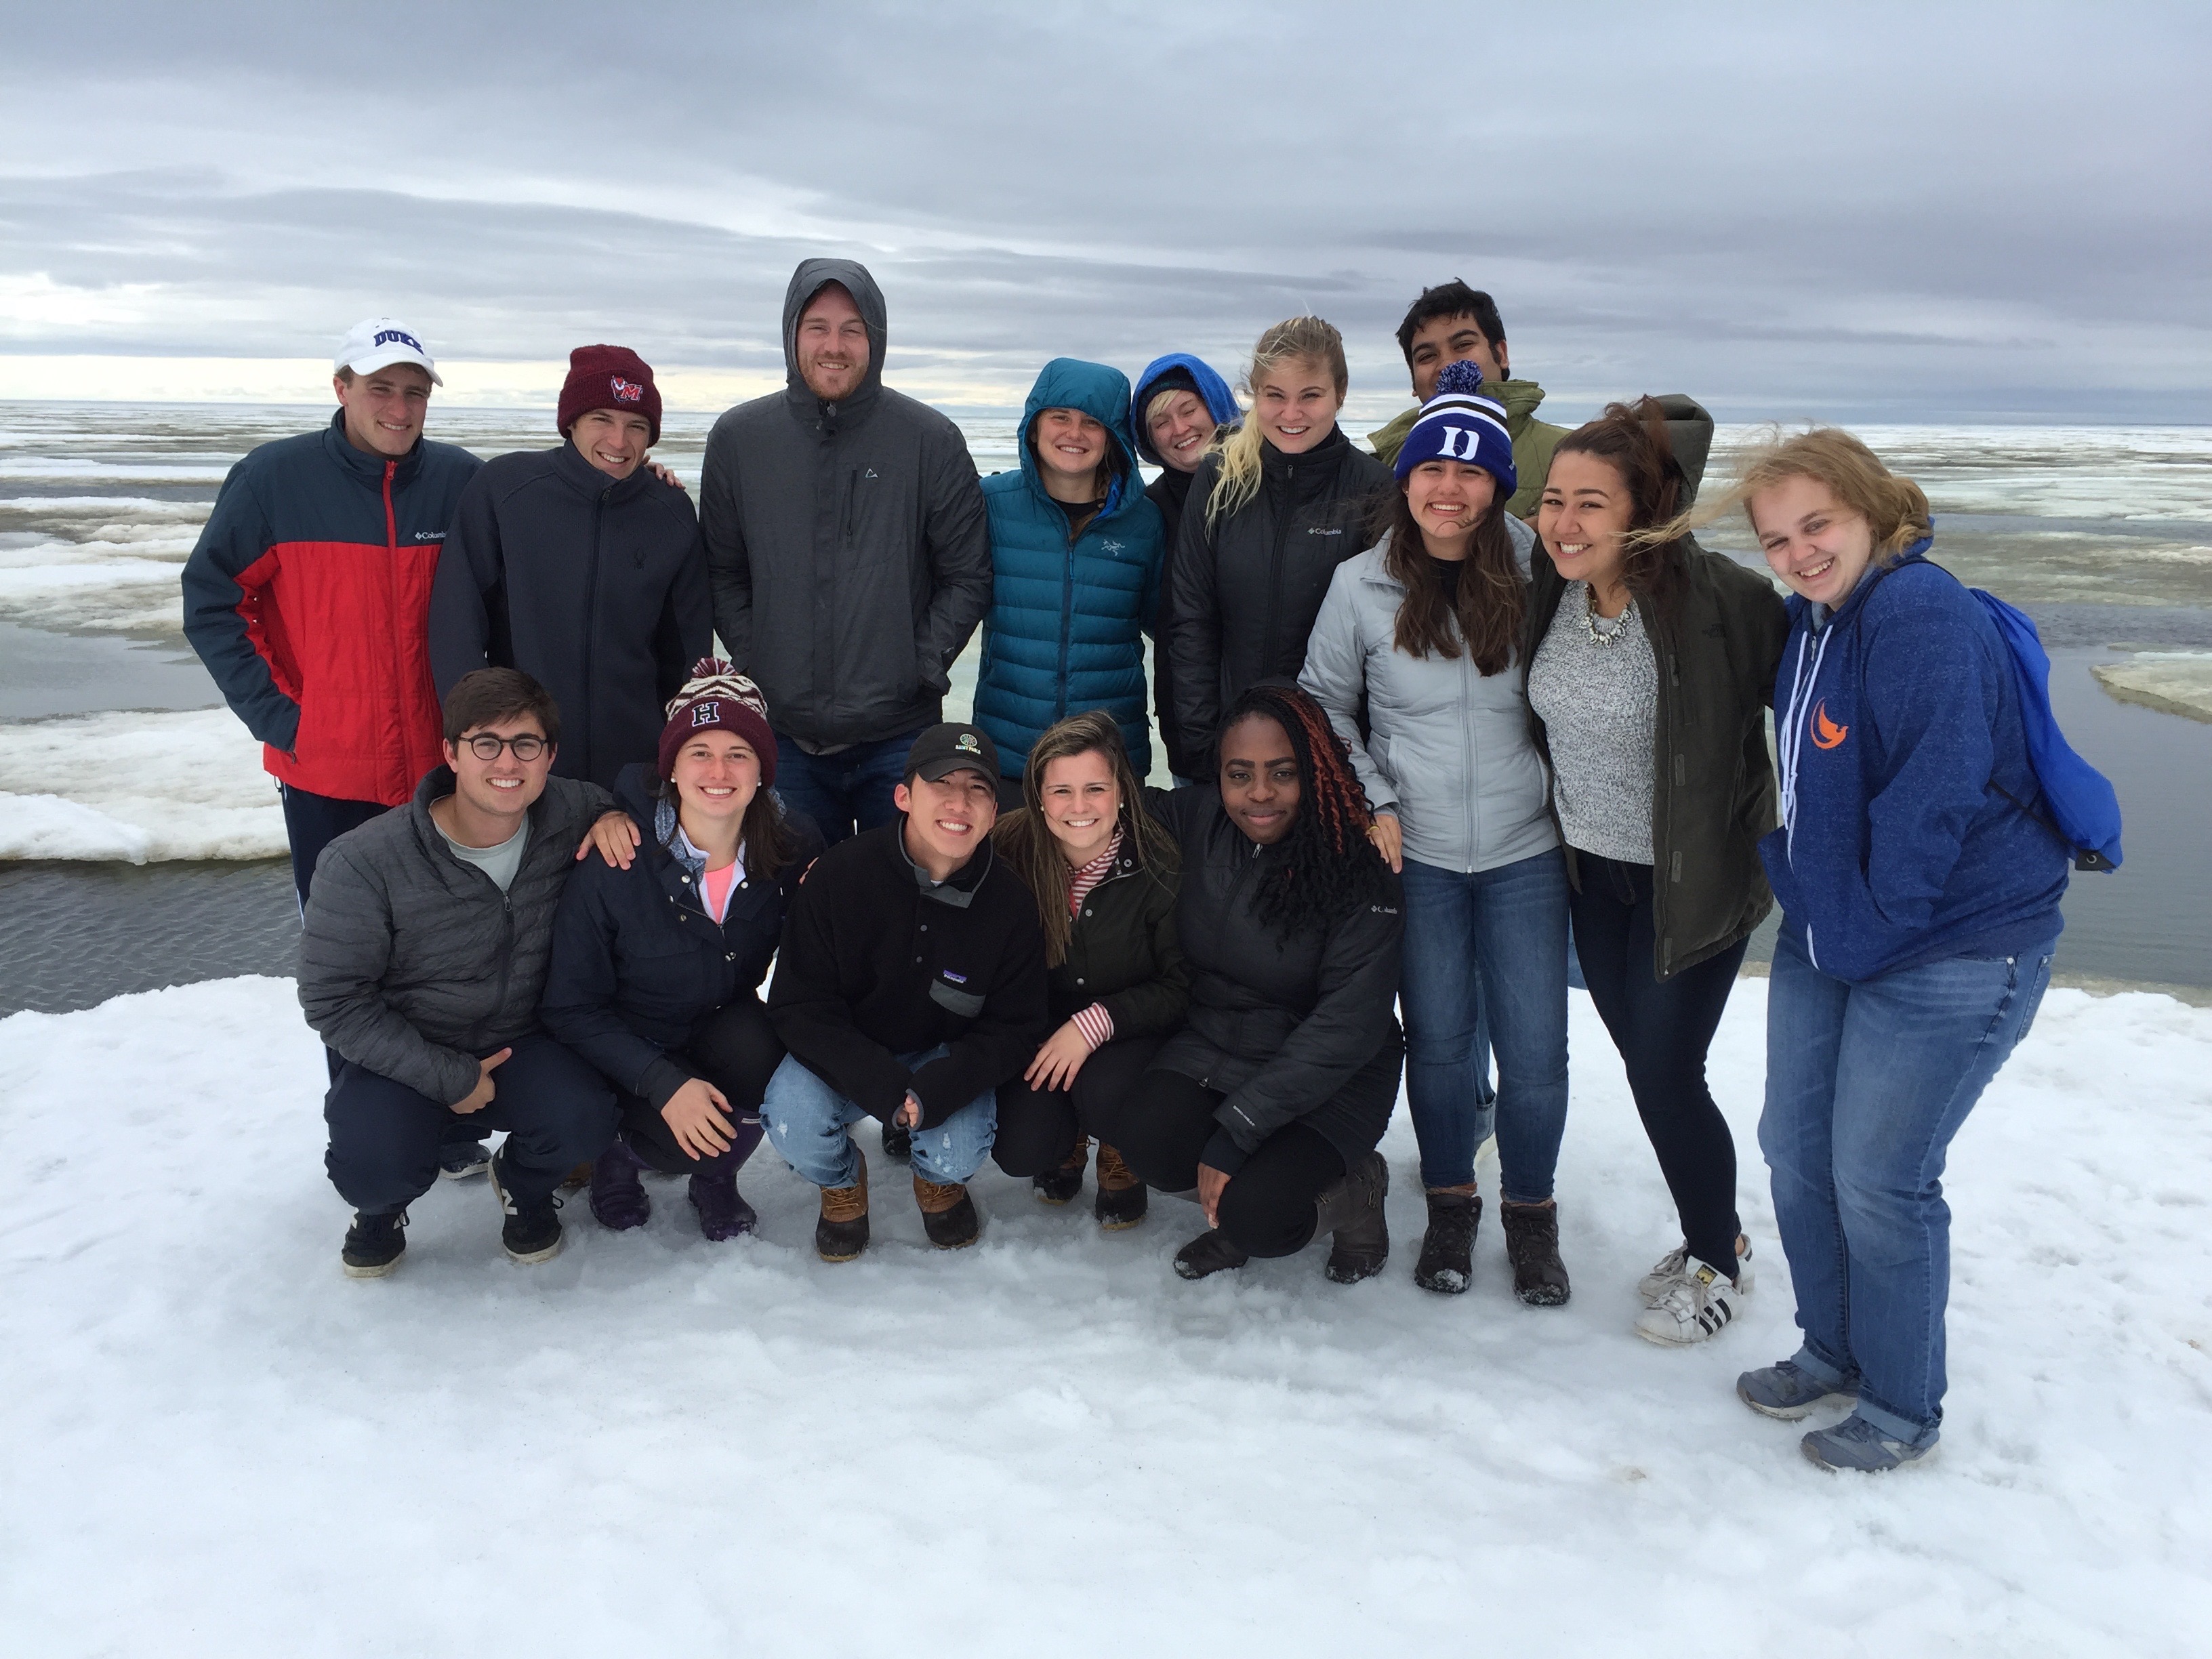 The class on the arctic ice in Utqiaġvik (Barrow), Alaska, the northernmost point in the United States.